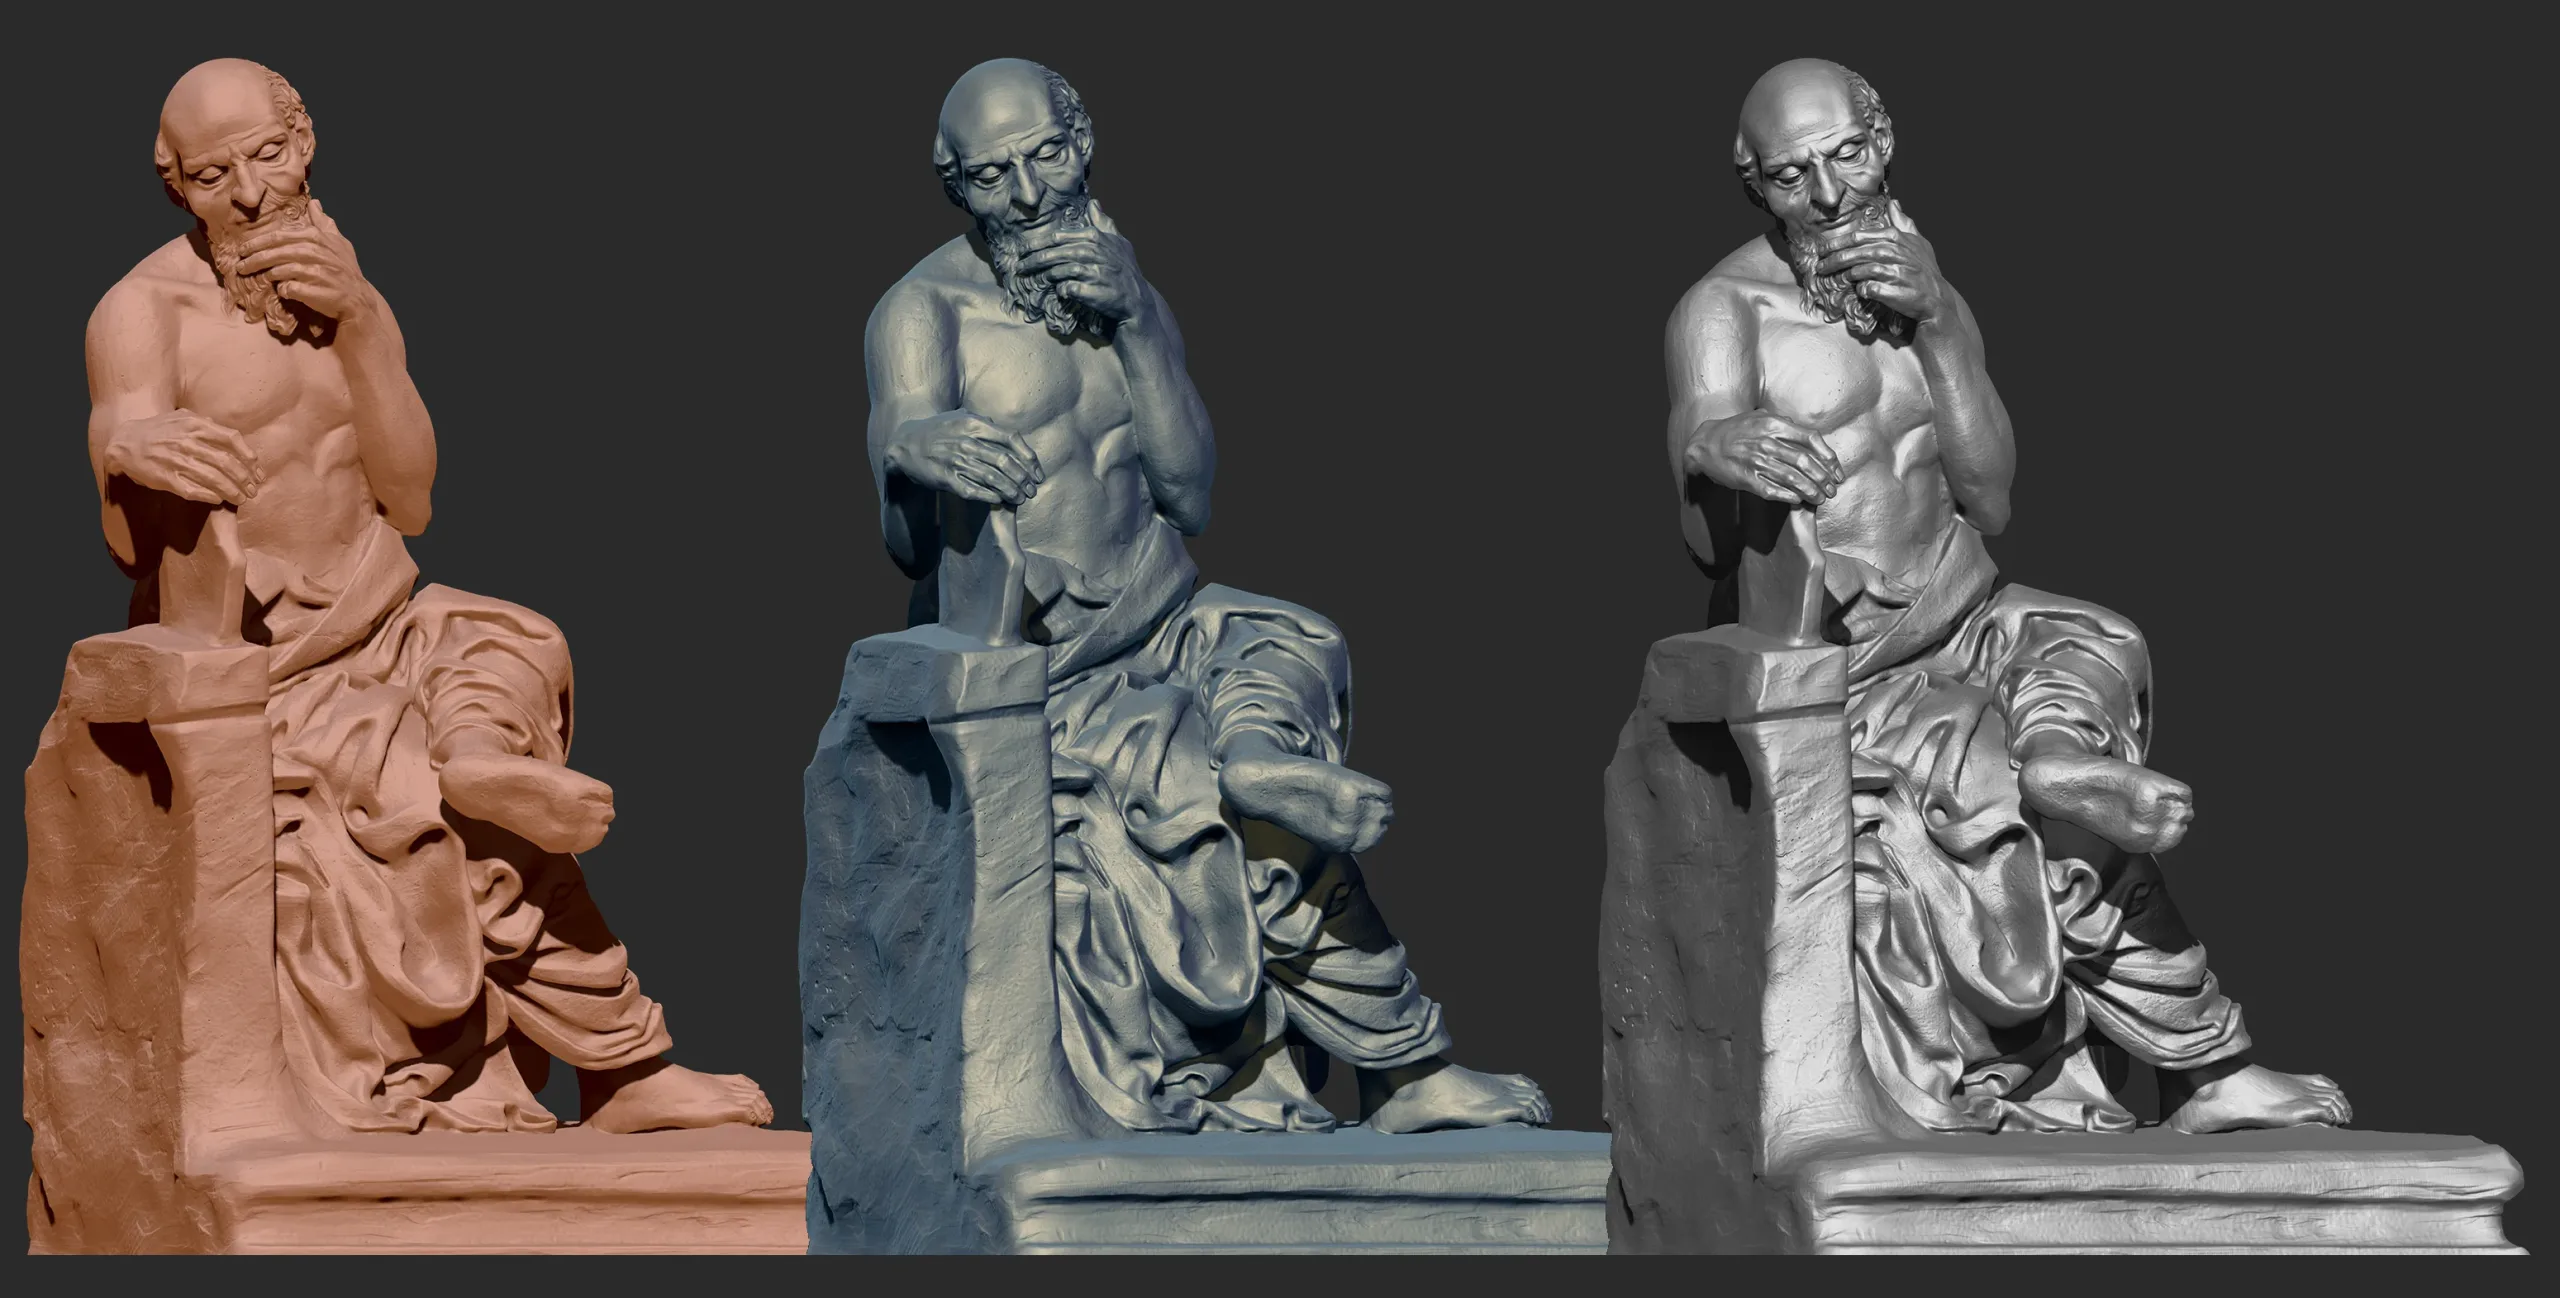 St.jerome Character Sculpture Zbrush 2019 HighPoly